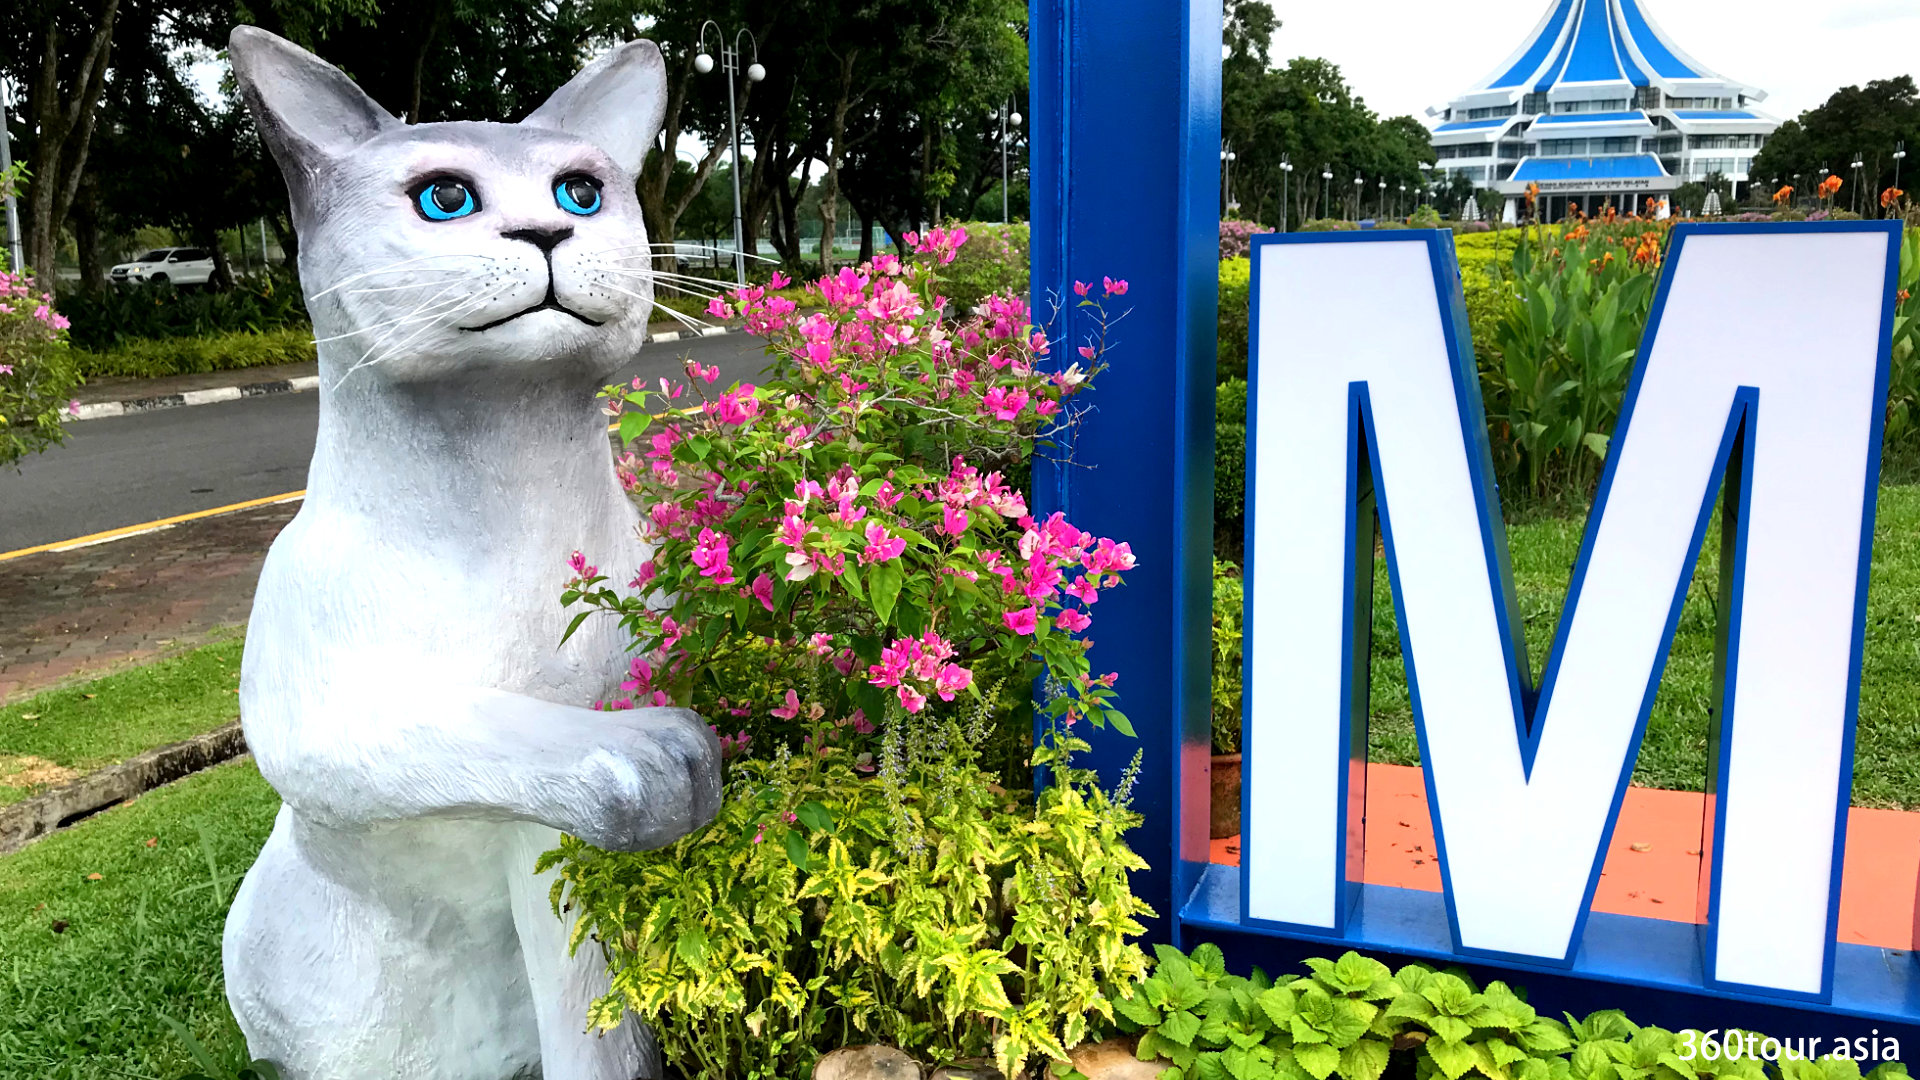 The Cat and the Blue Frame at MBKS Kuching | 360Tour.Asia